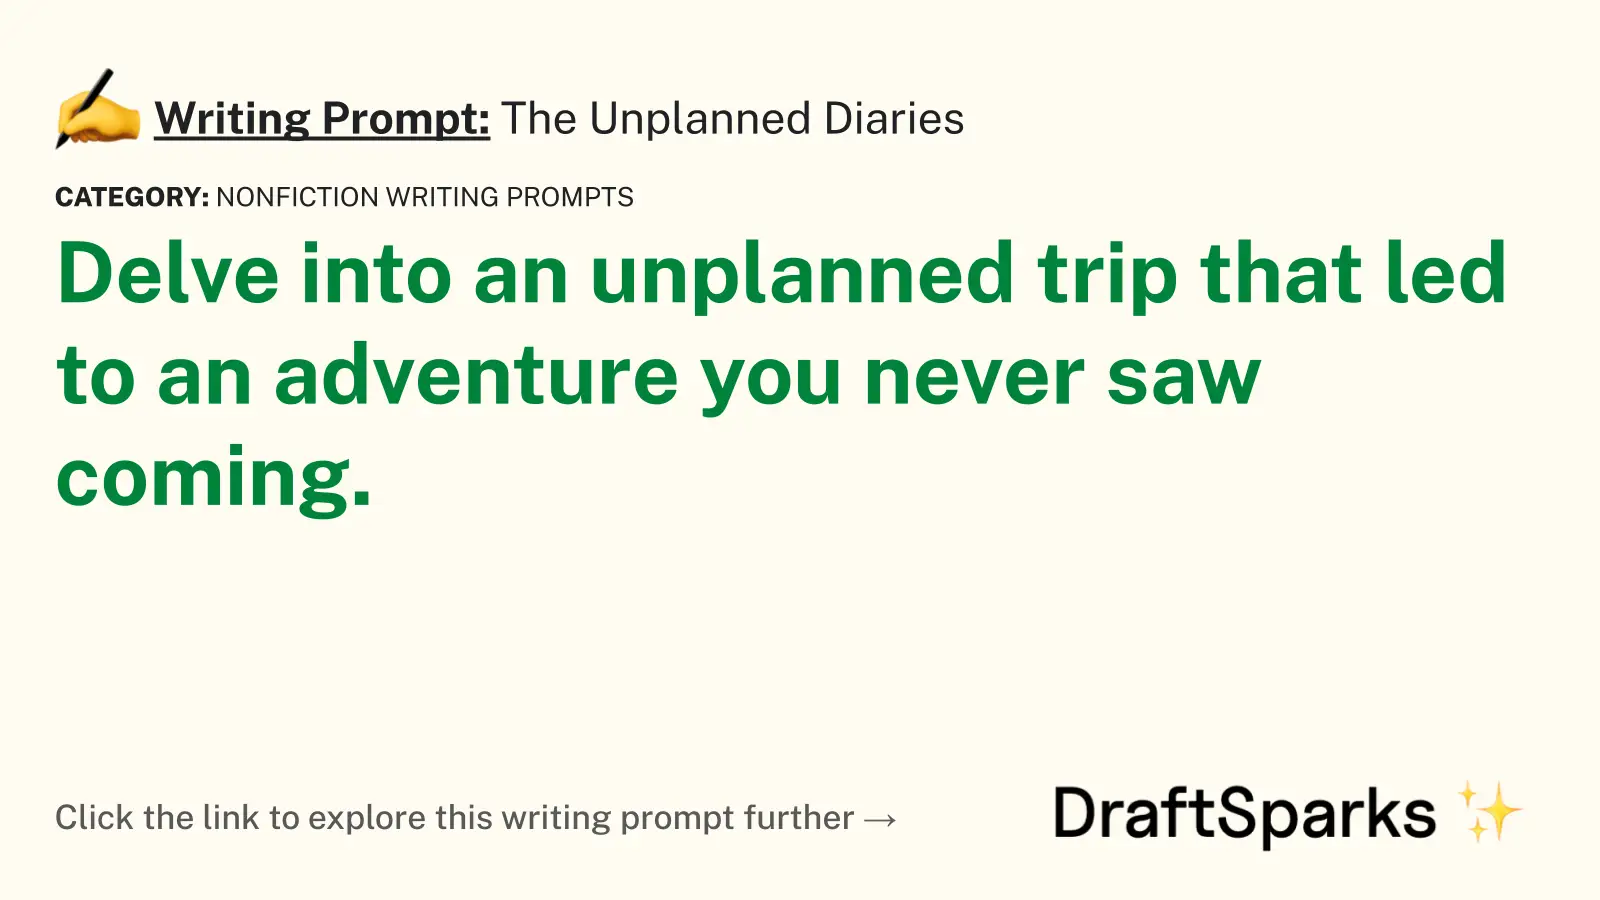 The Unplanned Diaries